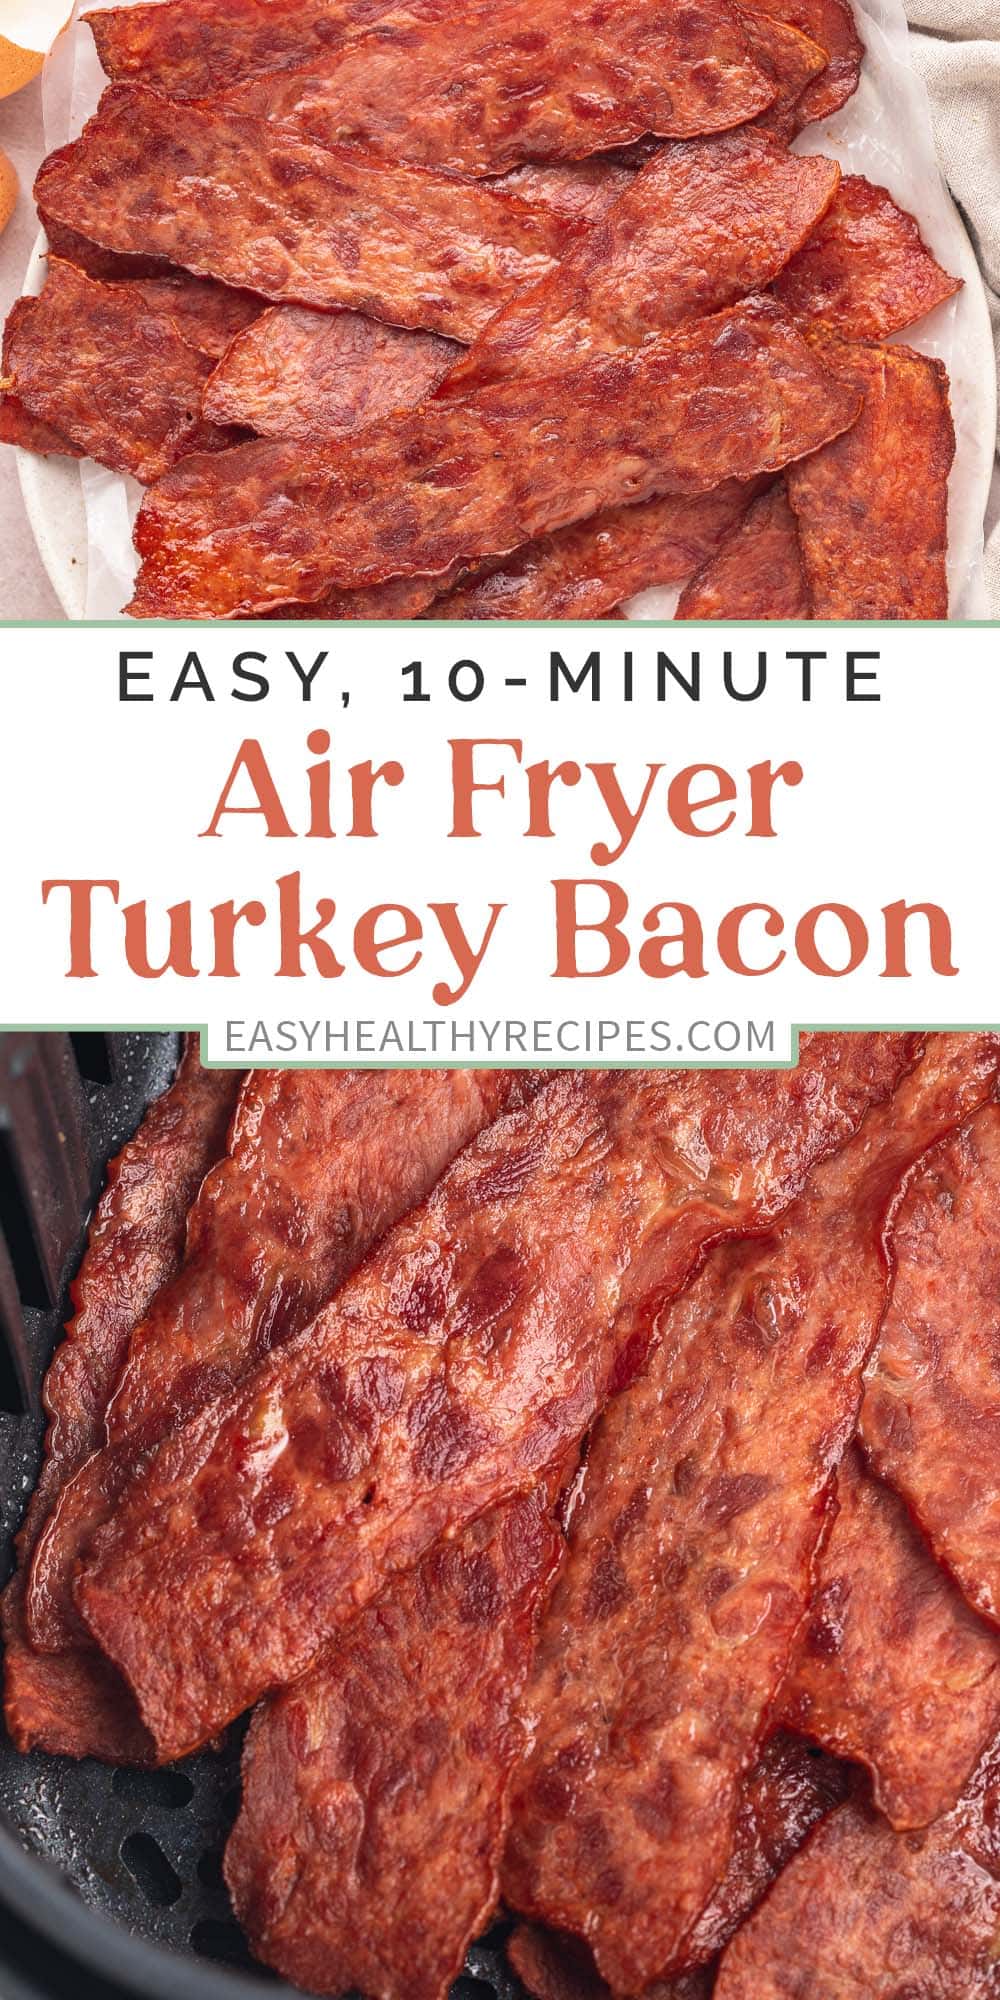 Pin graphic for air fryer turkey bacon.